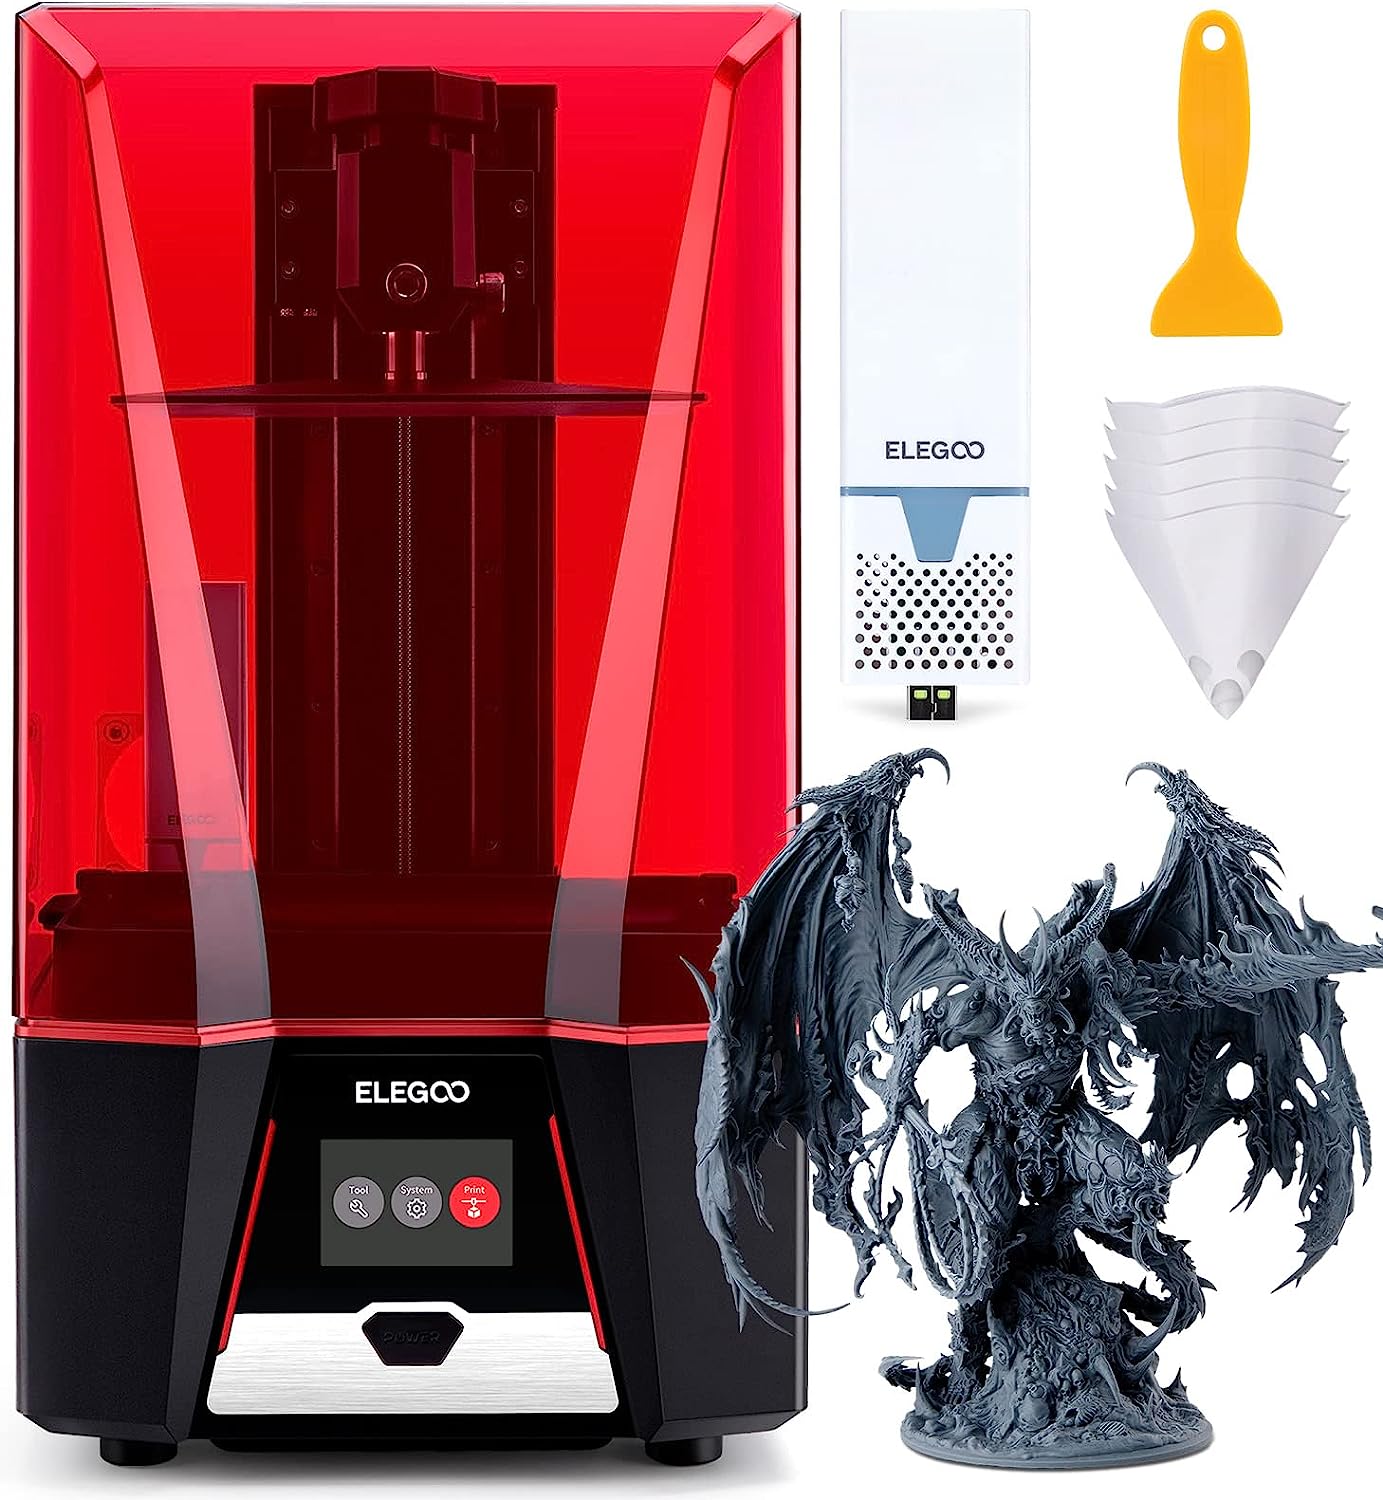 A picture of a resin 3d printer